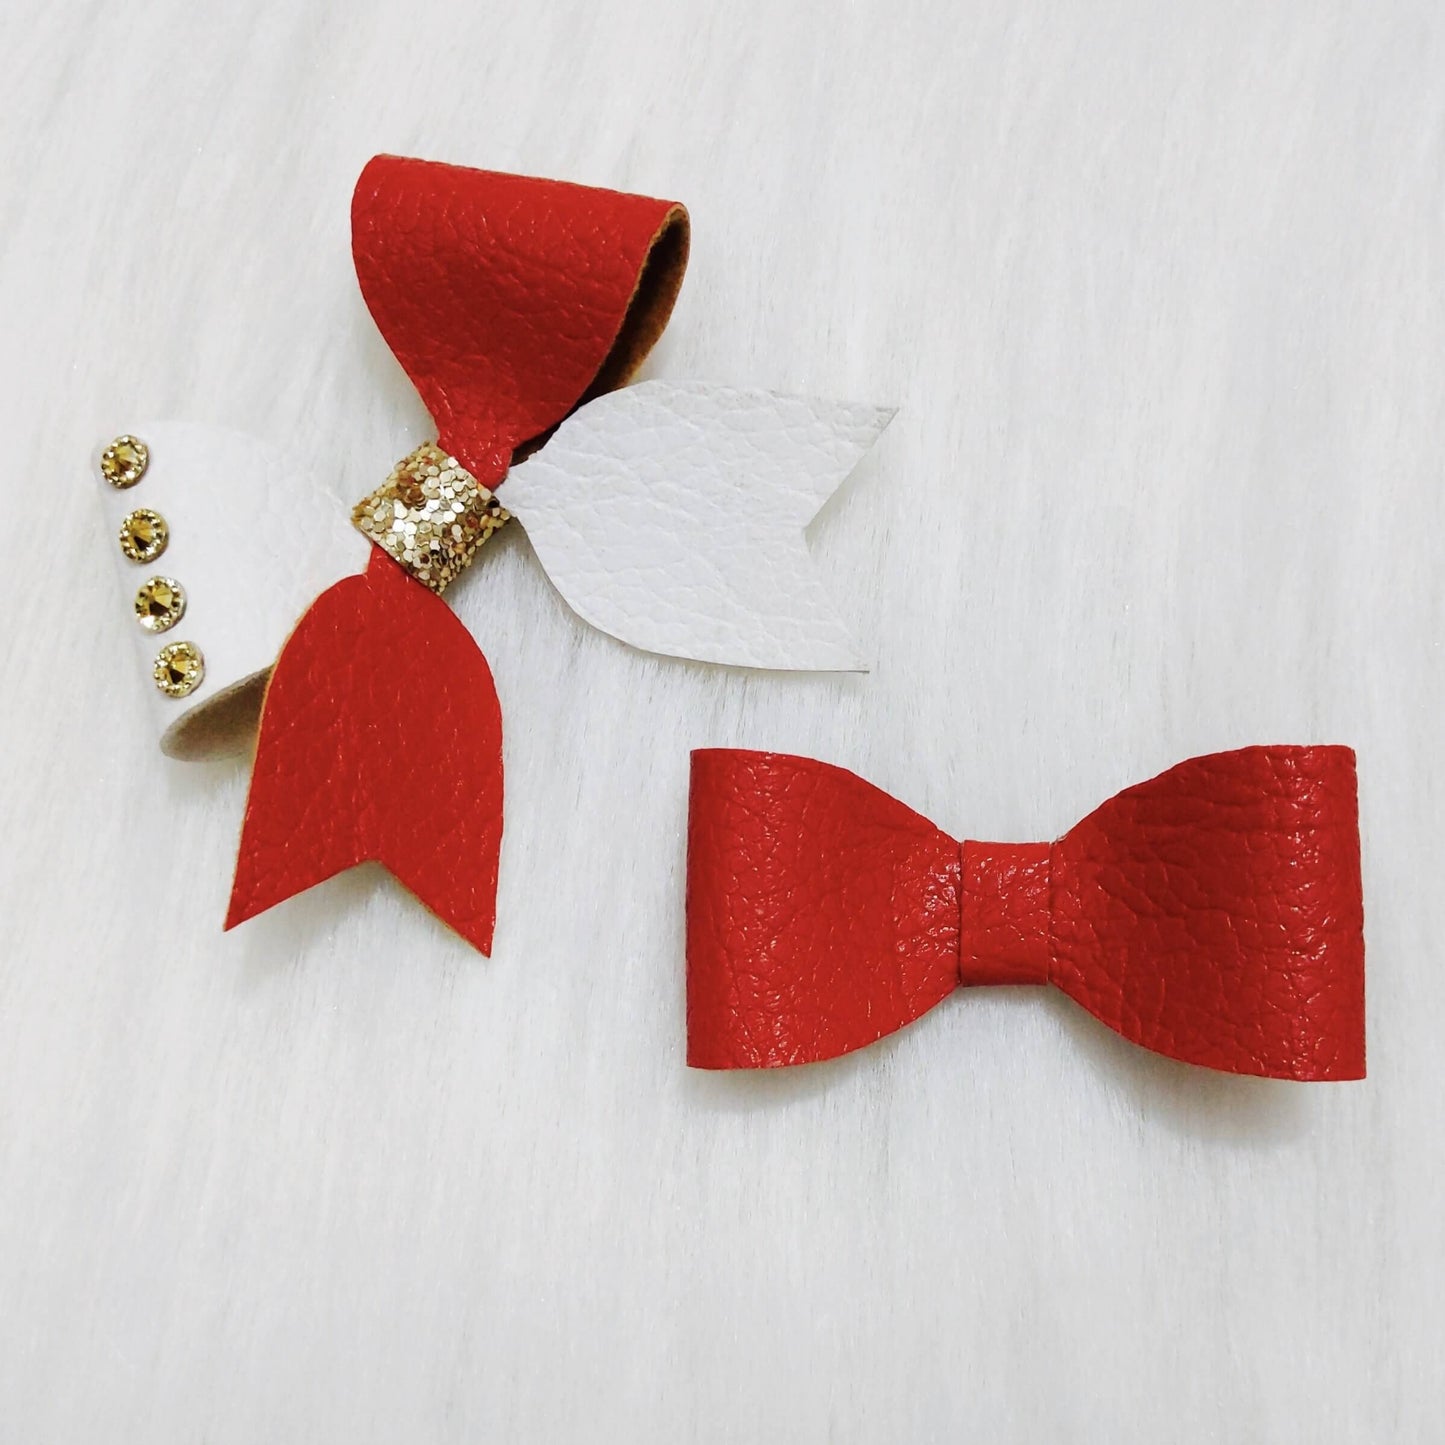 Red and White set of 2 Bow Hair Clips | Hair Accessories for Kids and Girls